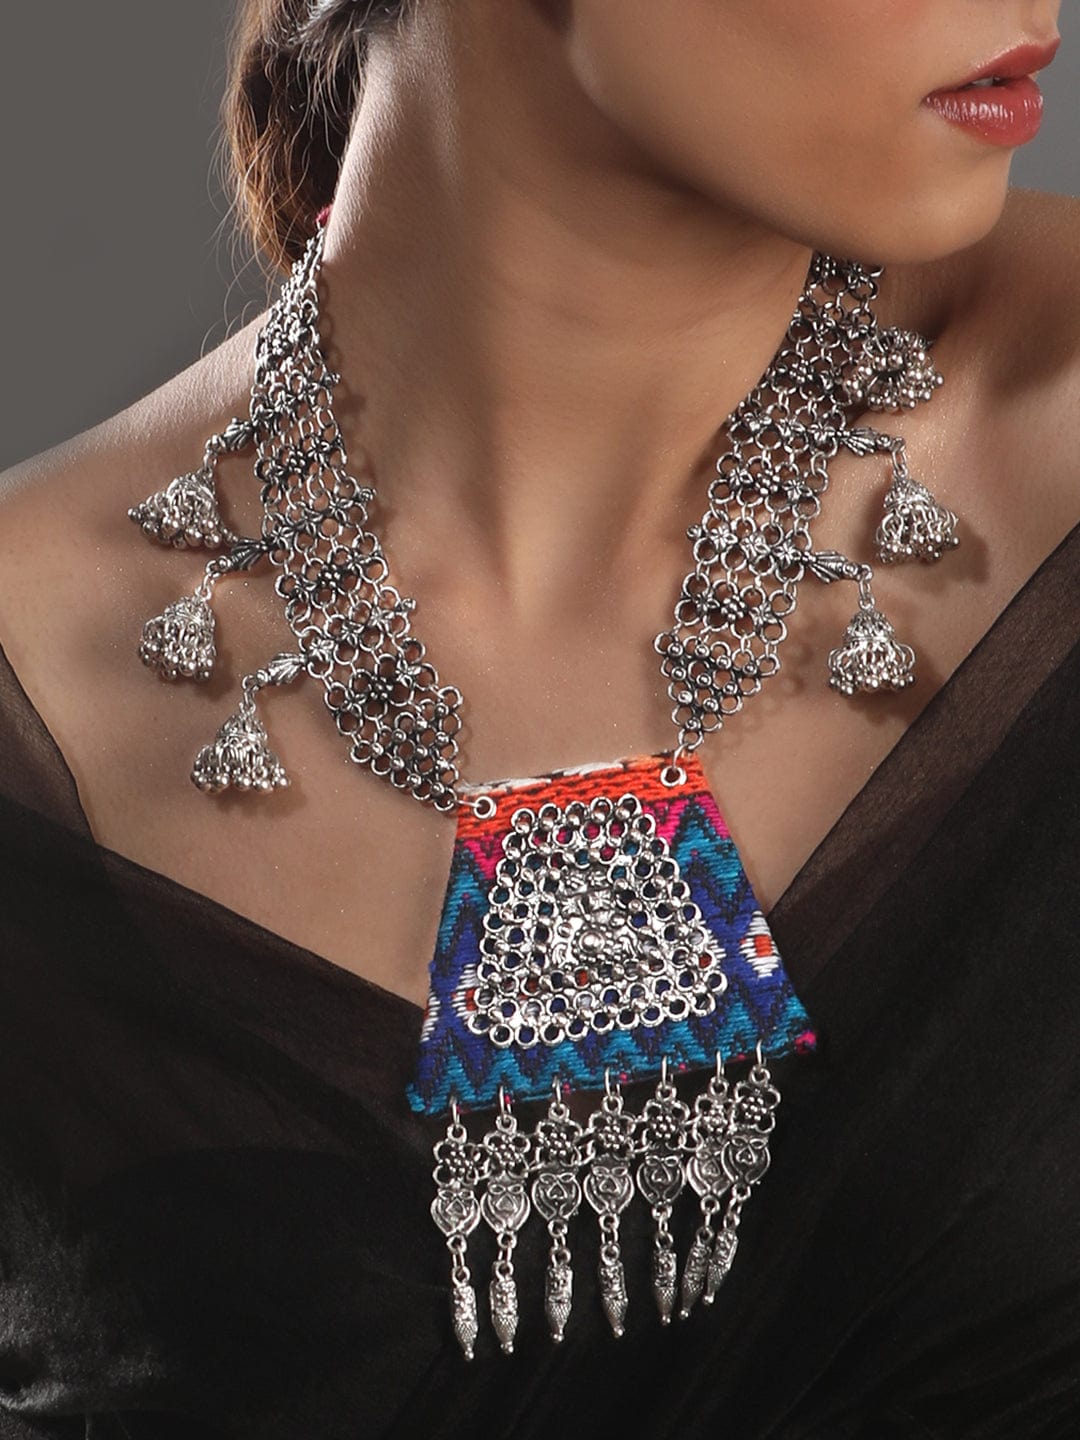 Rubans Oxidized Silver Plated Beaded & Threaded Statement Long Necklace Necklaces, Necklace Sets, Chains & Mangalsutra